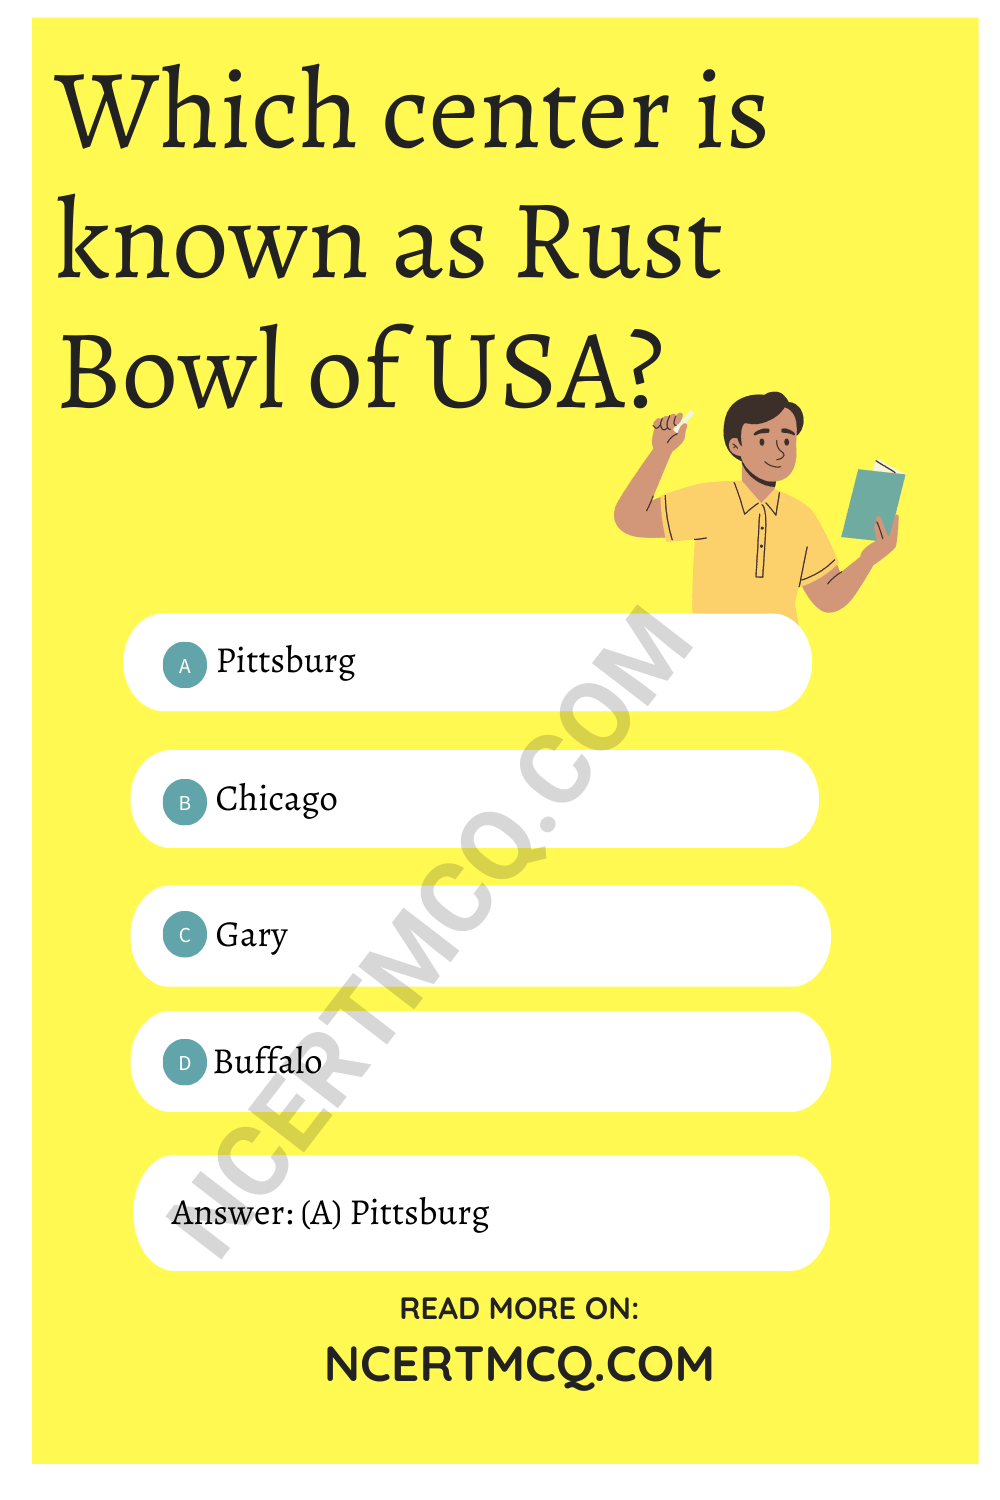 Which center is known as Rust Bowl of USA?